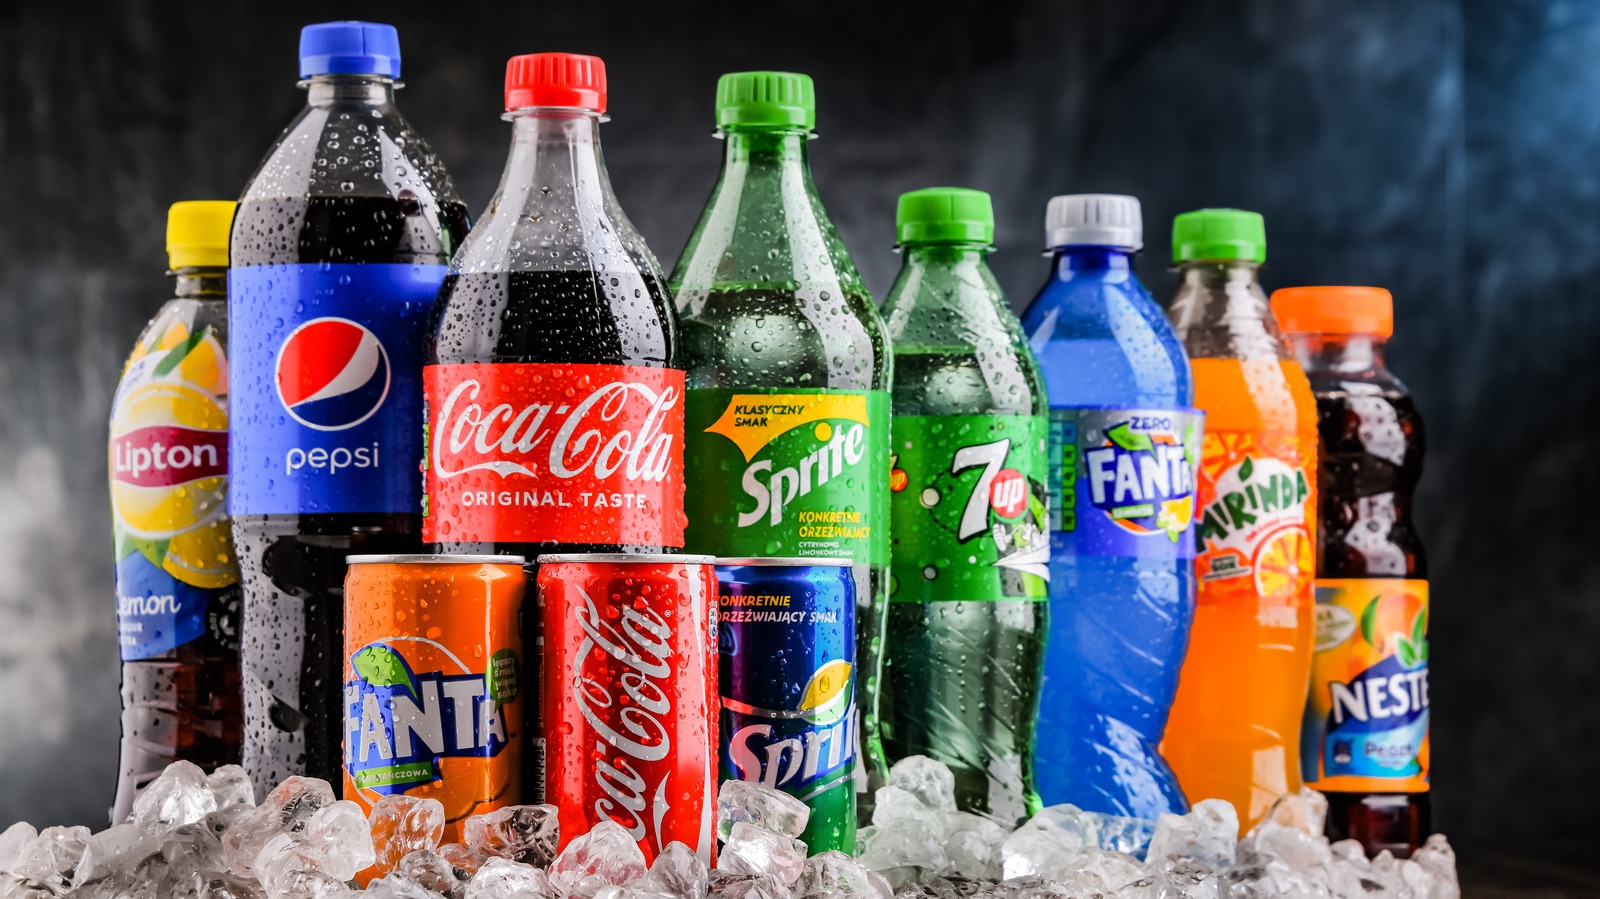 The Soda Brand You Are, Based On Your Zodiac Sign